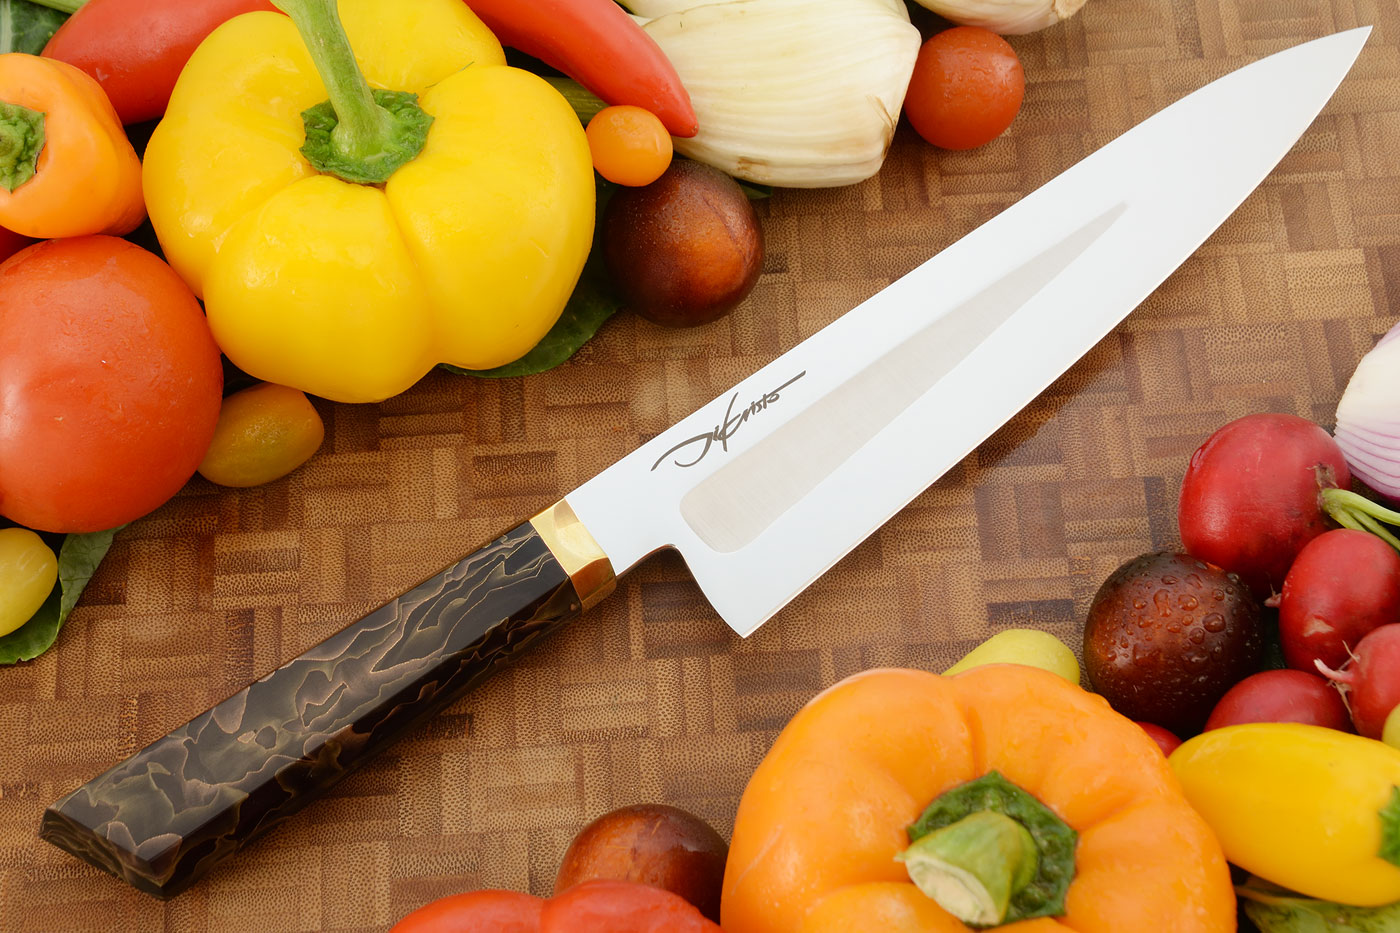 Elpis S-Grind Gyuto Chef's Knife (8.6